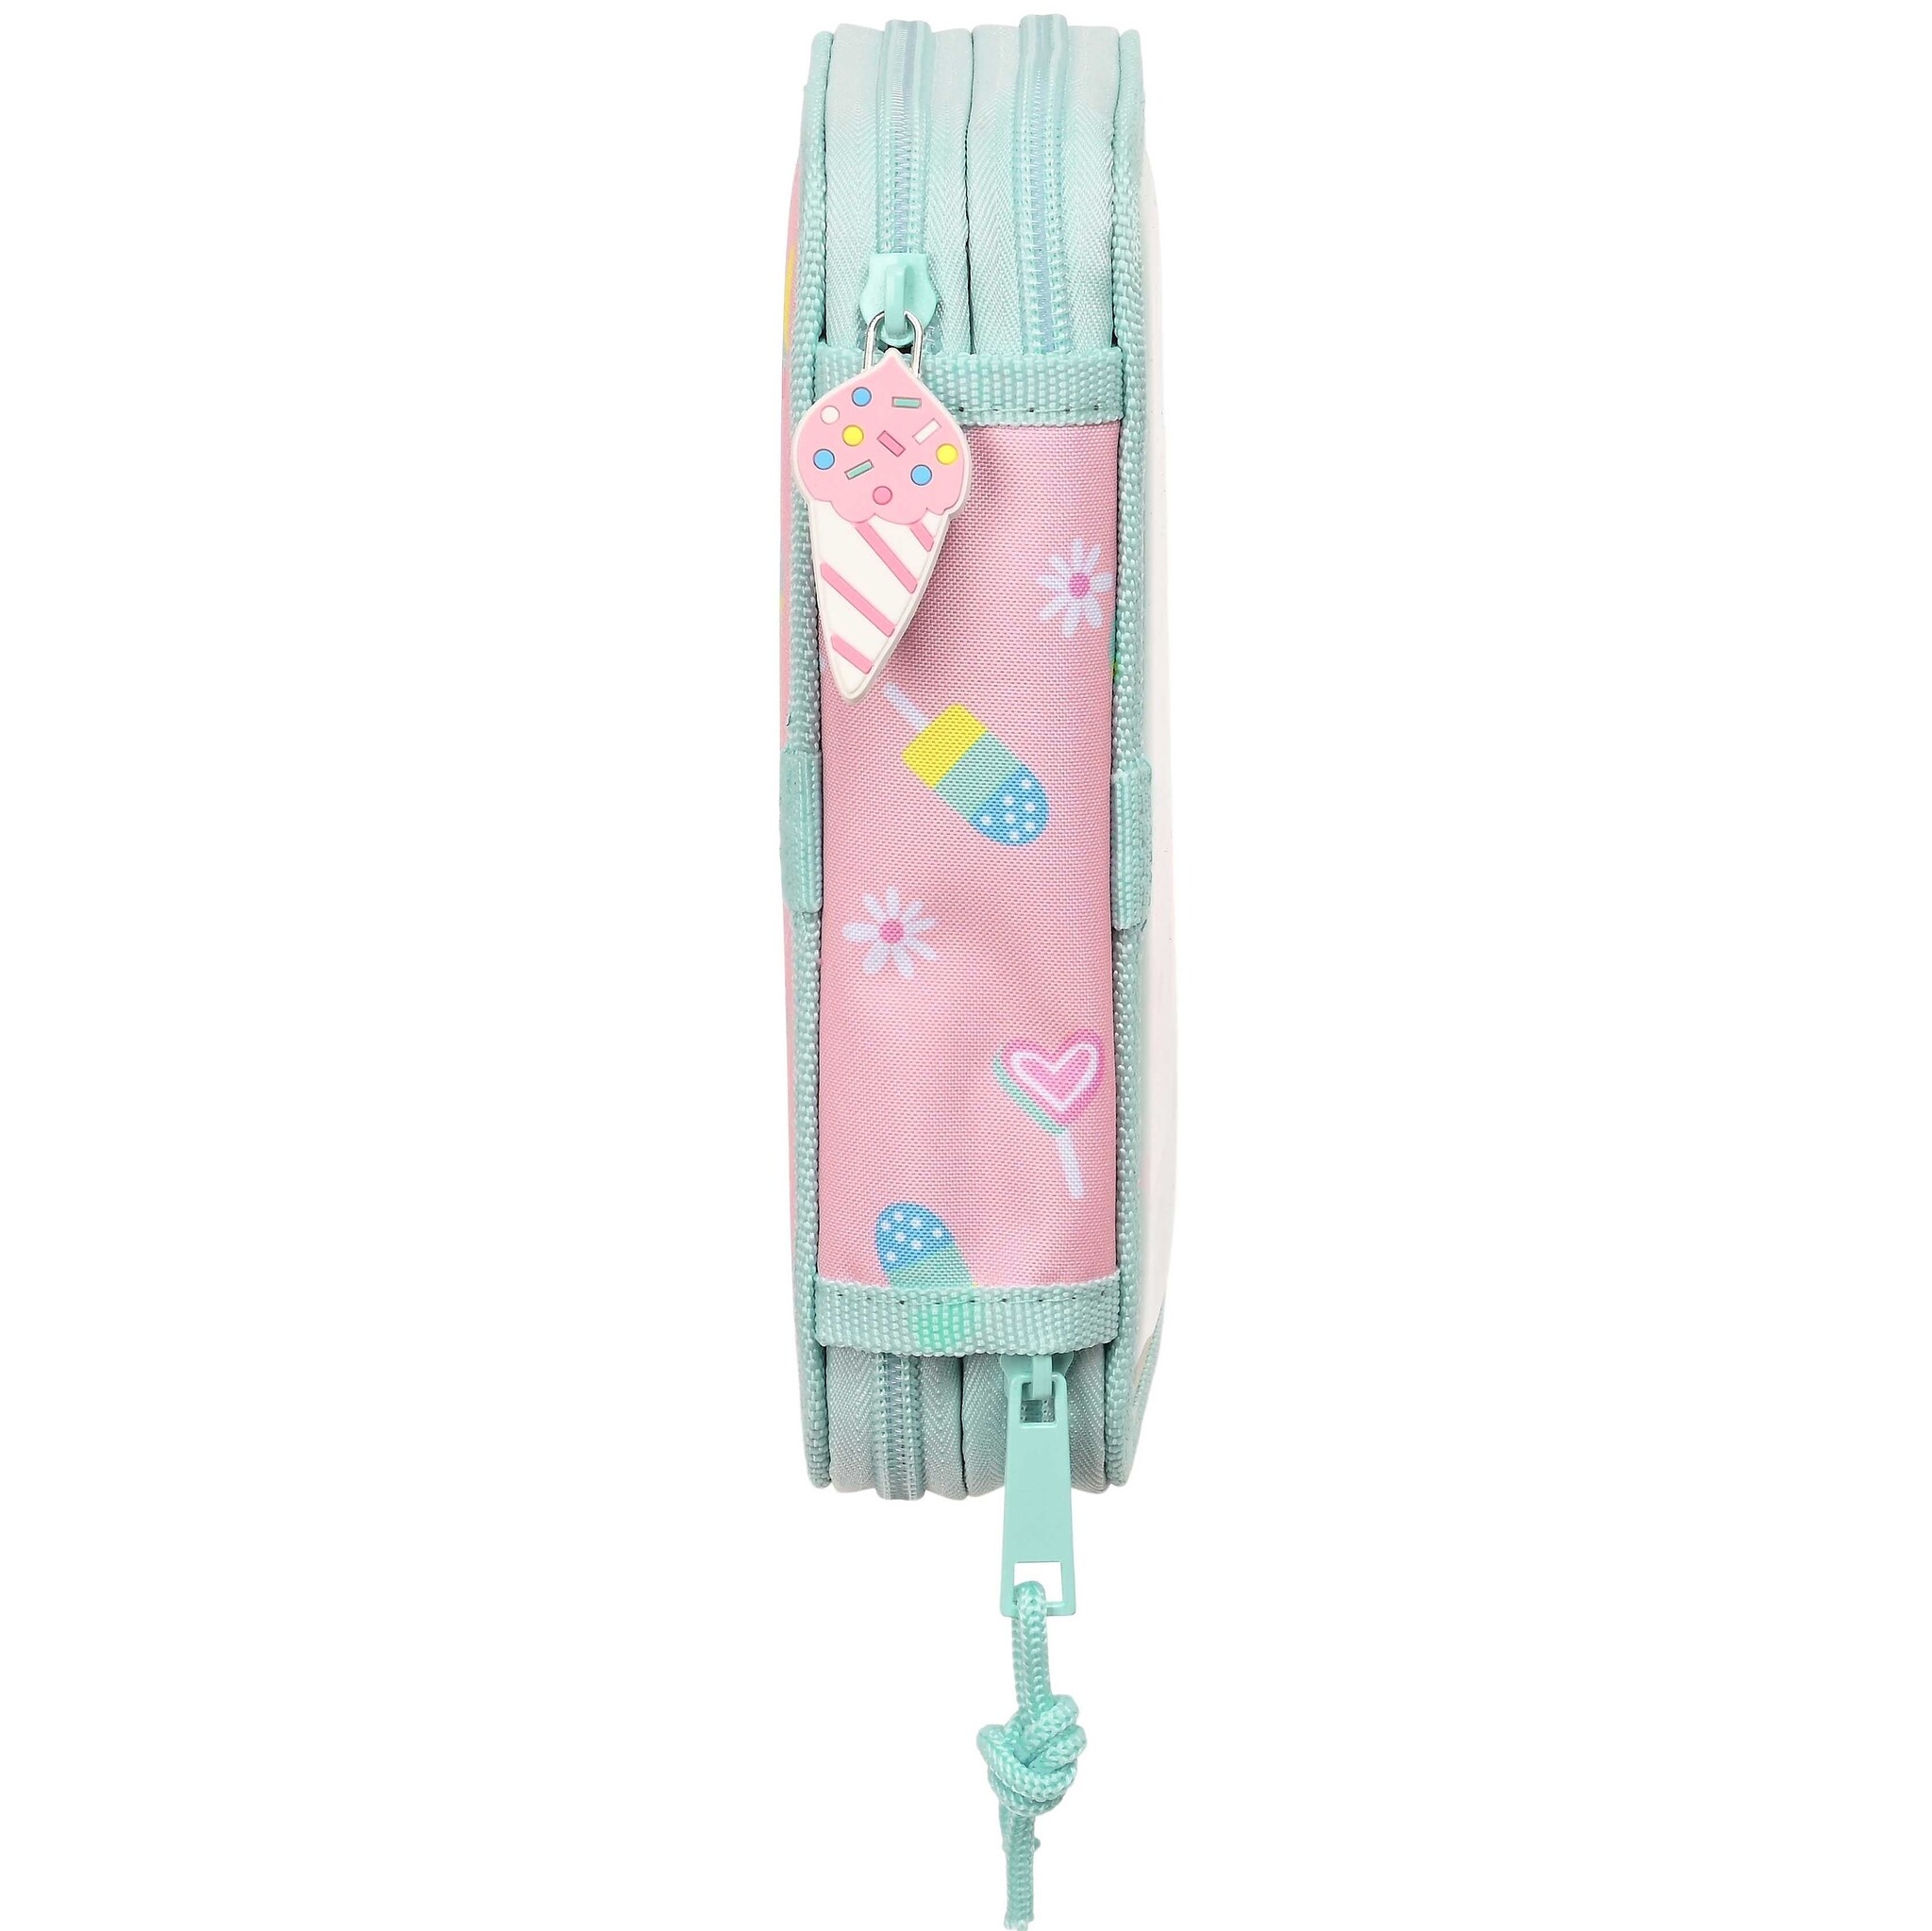 Peppa Pig Filled Pouch, Ice Cream - 28 pcs. - 19.5 x 12.5 x 4 cm - Polyester